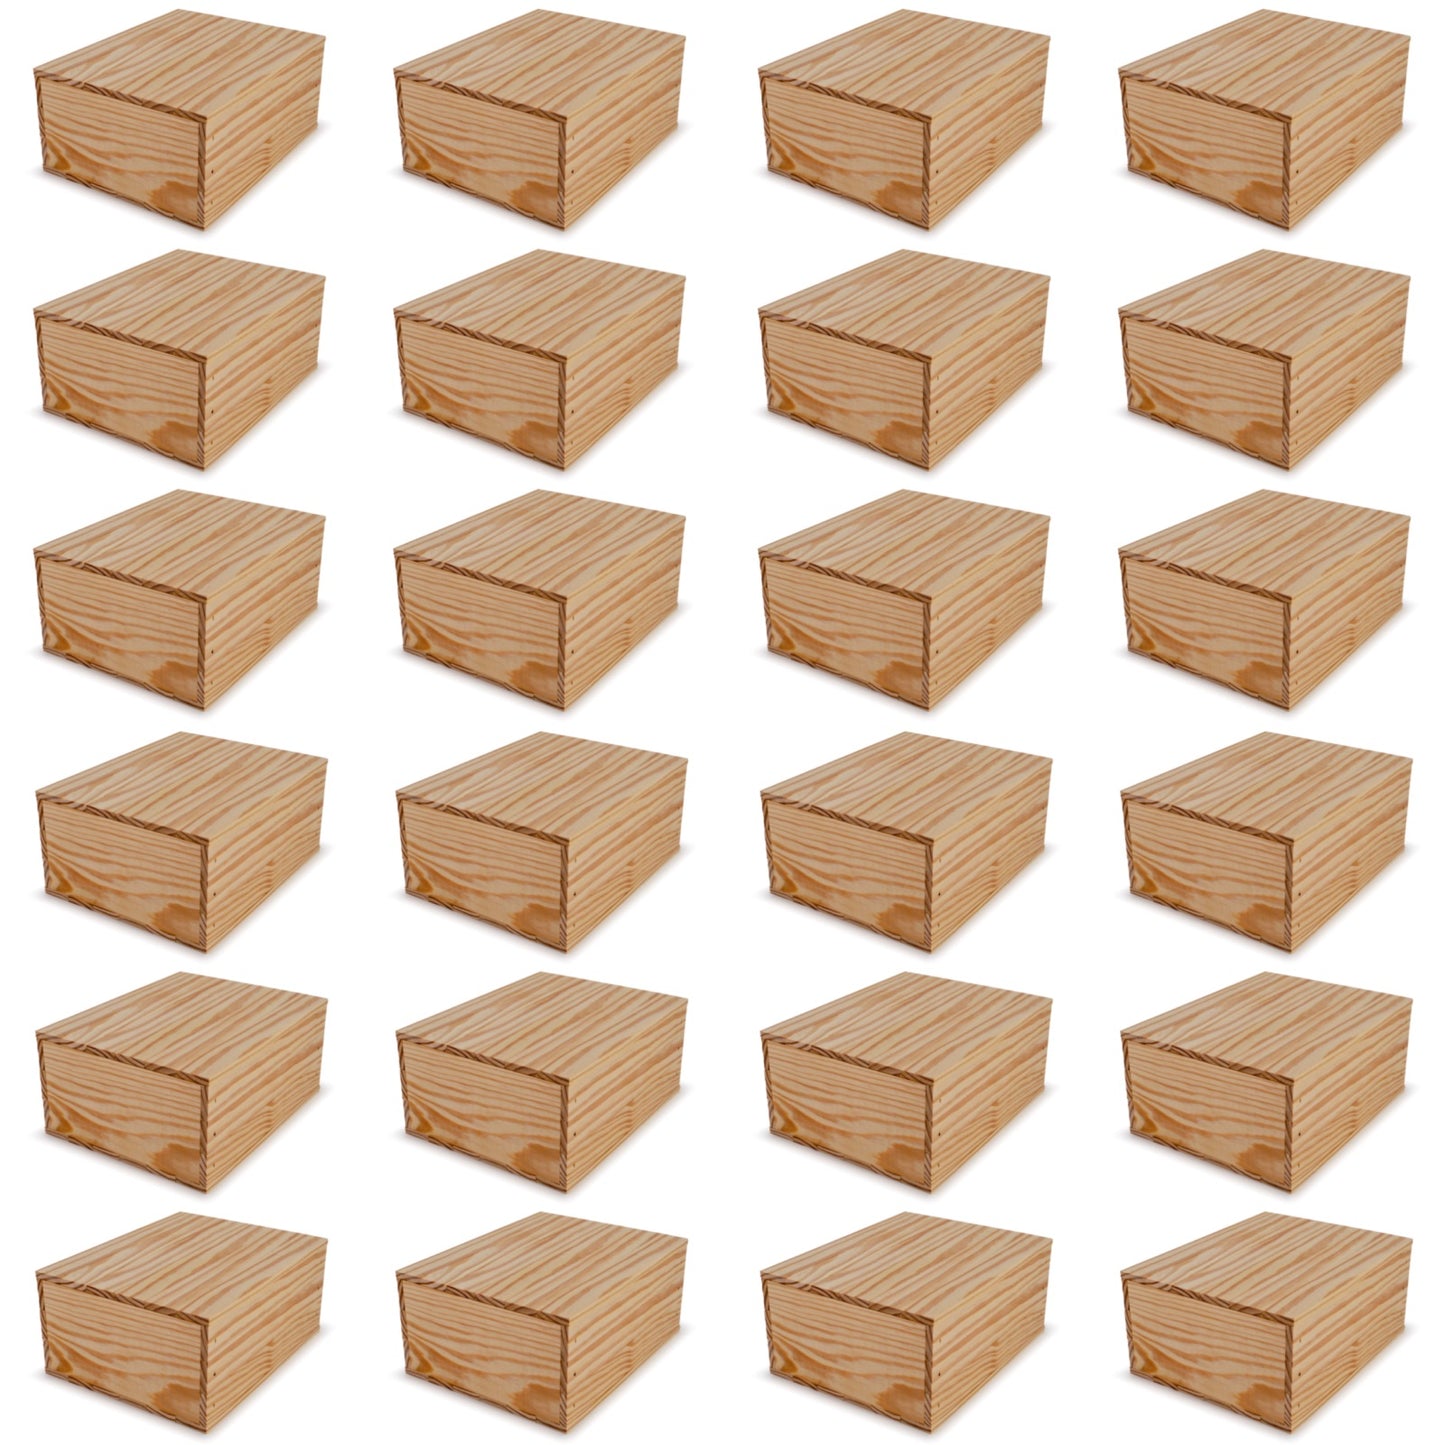 24 Small wooden crates with lid 12x9.75x5.25